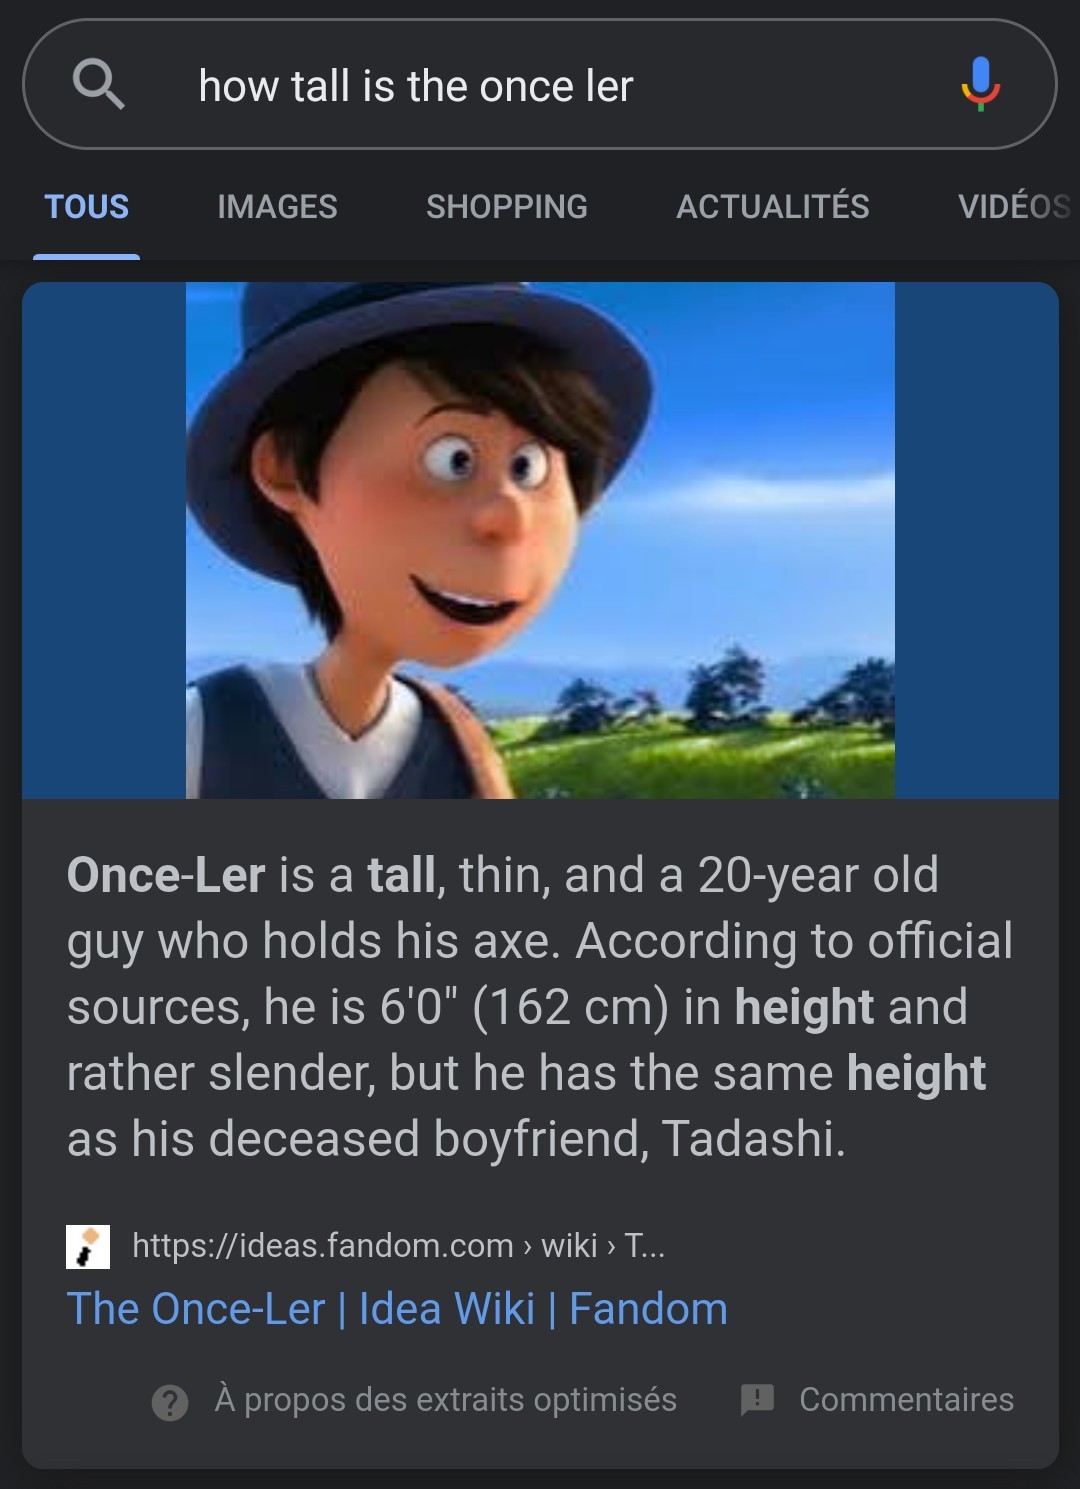 How tall is the once-ler